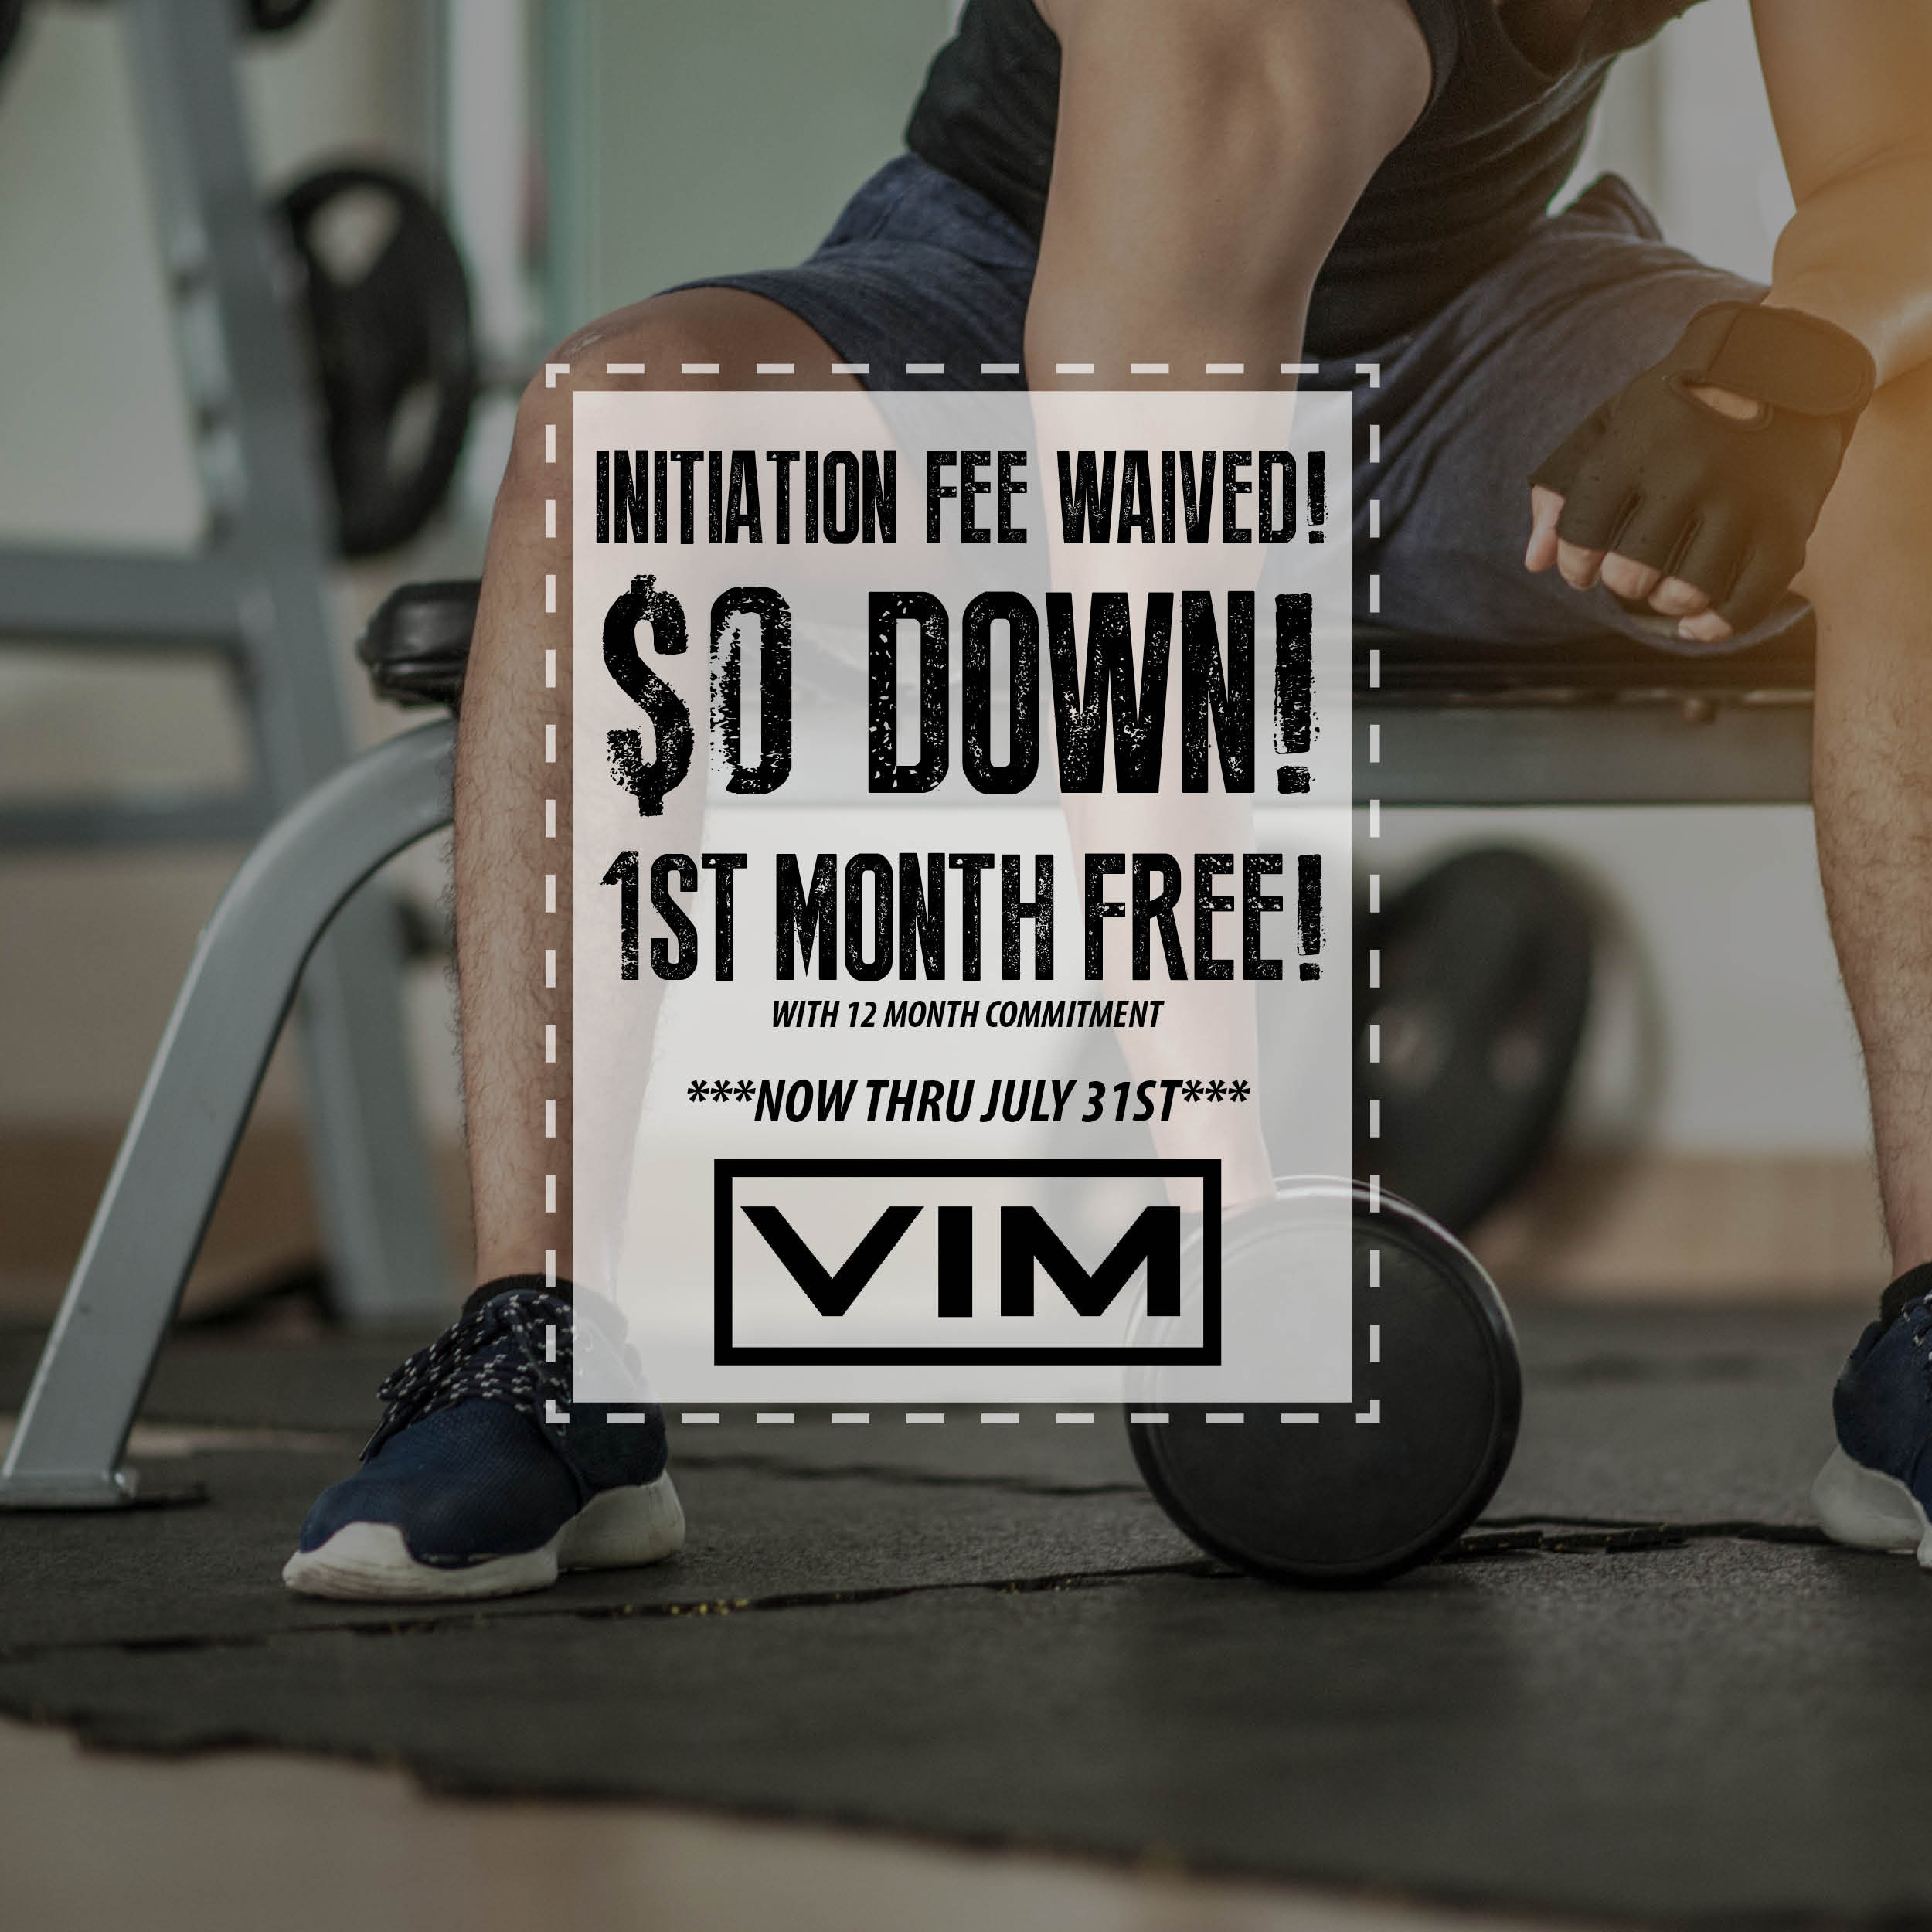 6 Day 24 Hour Fitness Initiation Fee Reddit for Gym